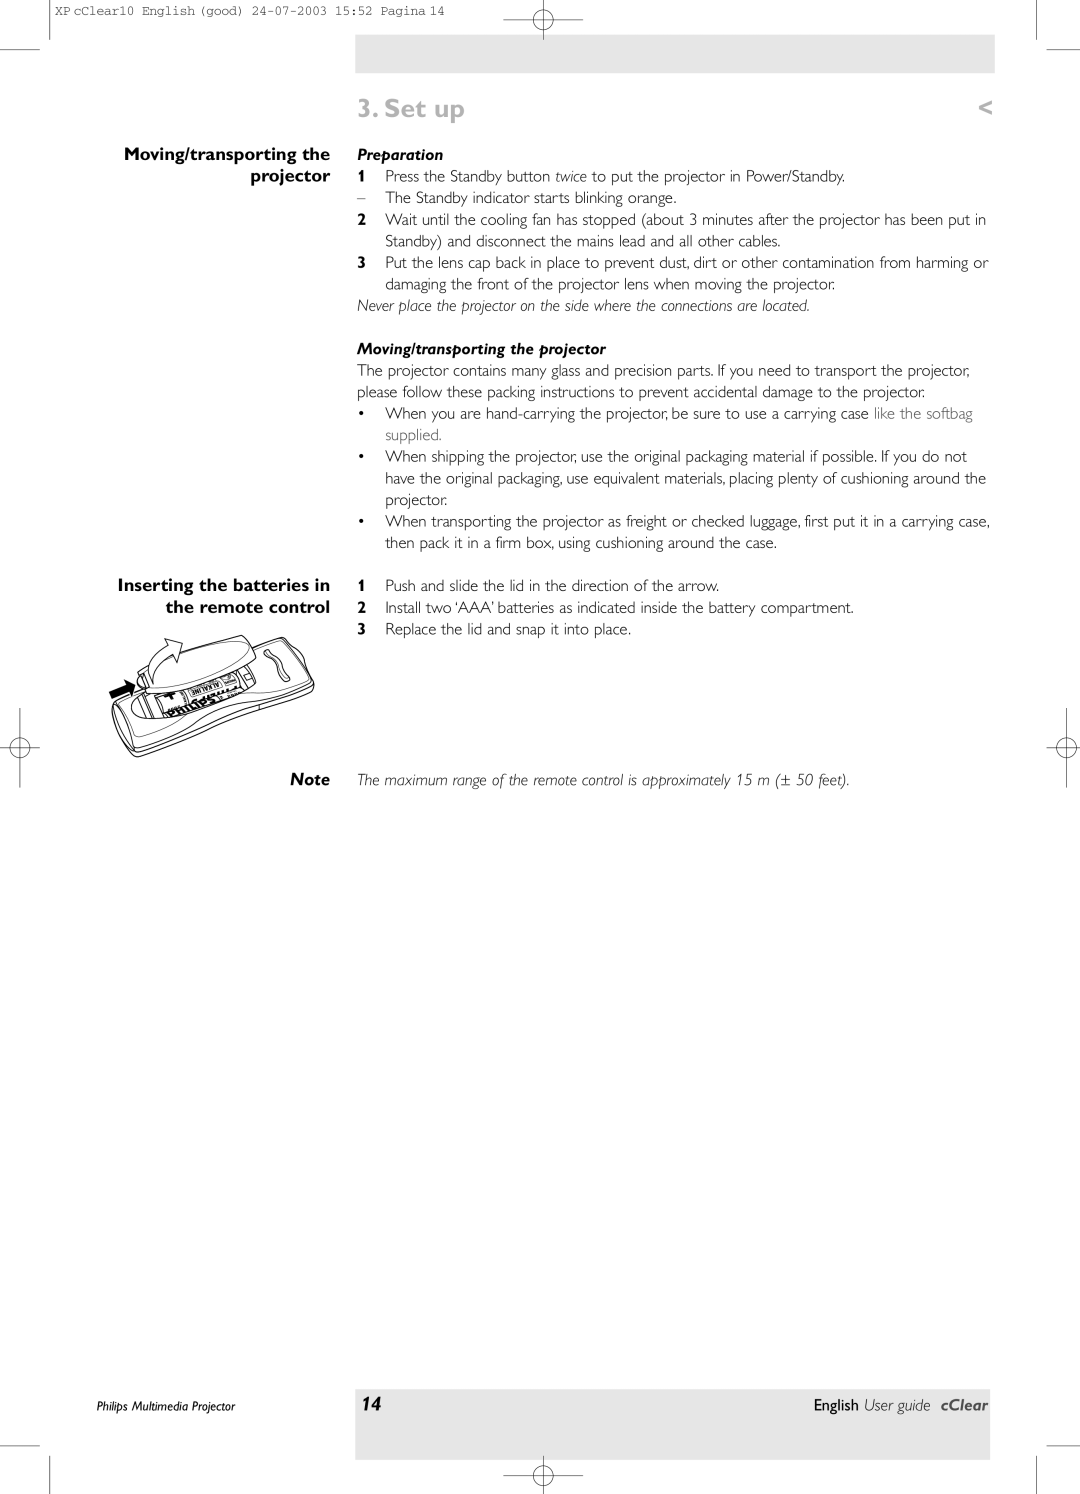 Philips bSure 1 manual the remote control, Set up, Preparation, Moving/transporting the projector 